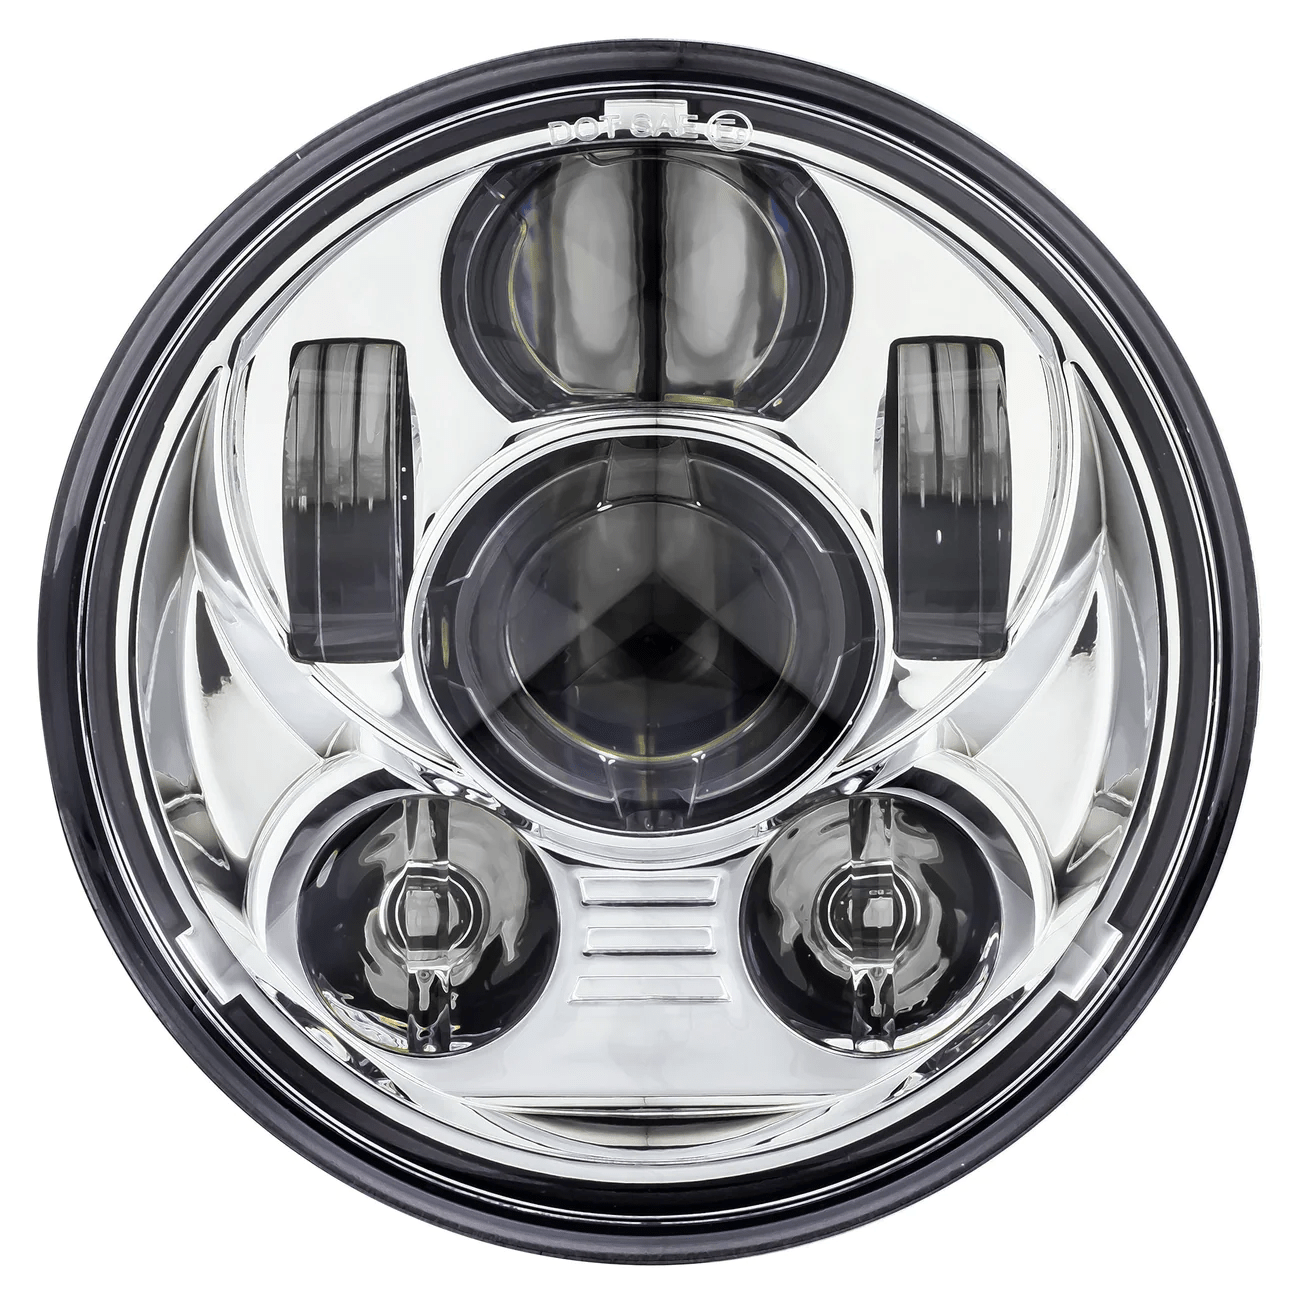 Eagle Lights 5 3/4" LED Headlight Kit for 2018 and Newer Harley Davidson Street Bob, Low Rider, and Softail Standard